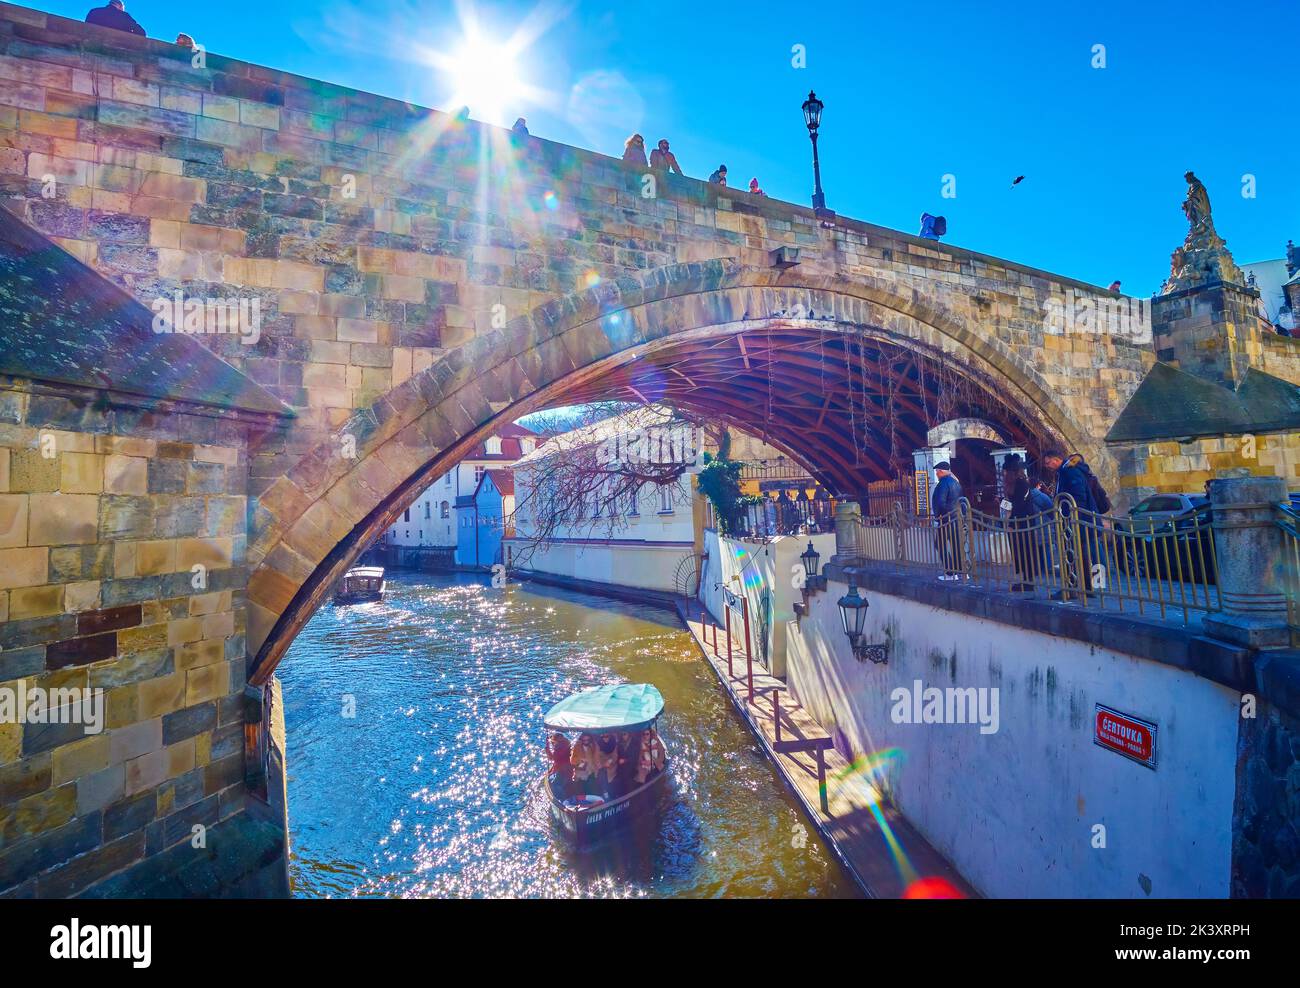 PRAGUE, CZECH REPUBLIC - MARCH 12, 2022: The boat sails along Certovka Canal under Charles Bridge, on March 12 in Prague, Czech Republic Stock Photo